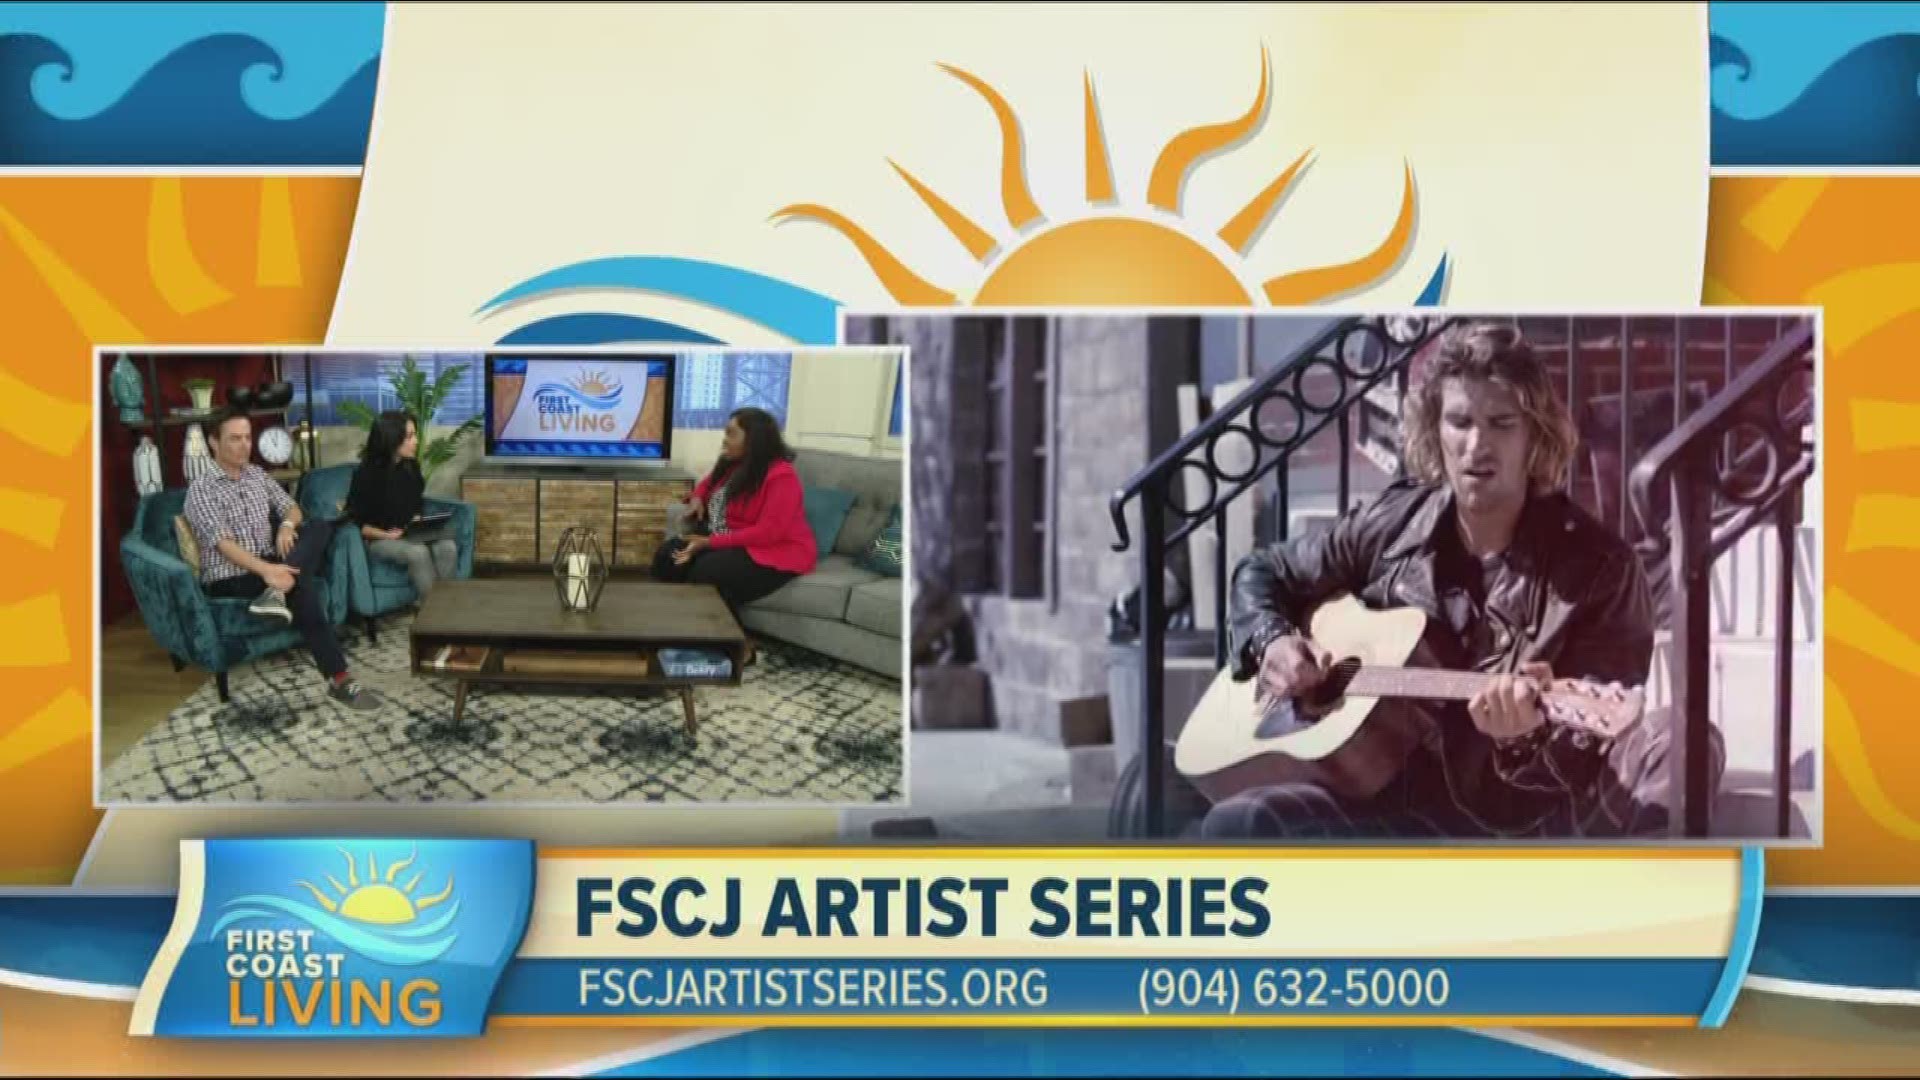 FSCJ Artist series has so many great shows coming to Jax.